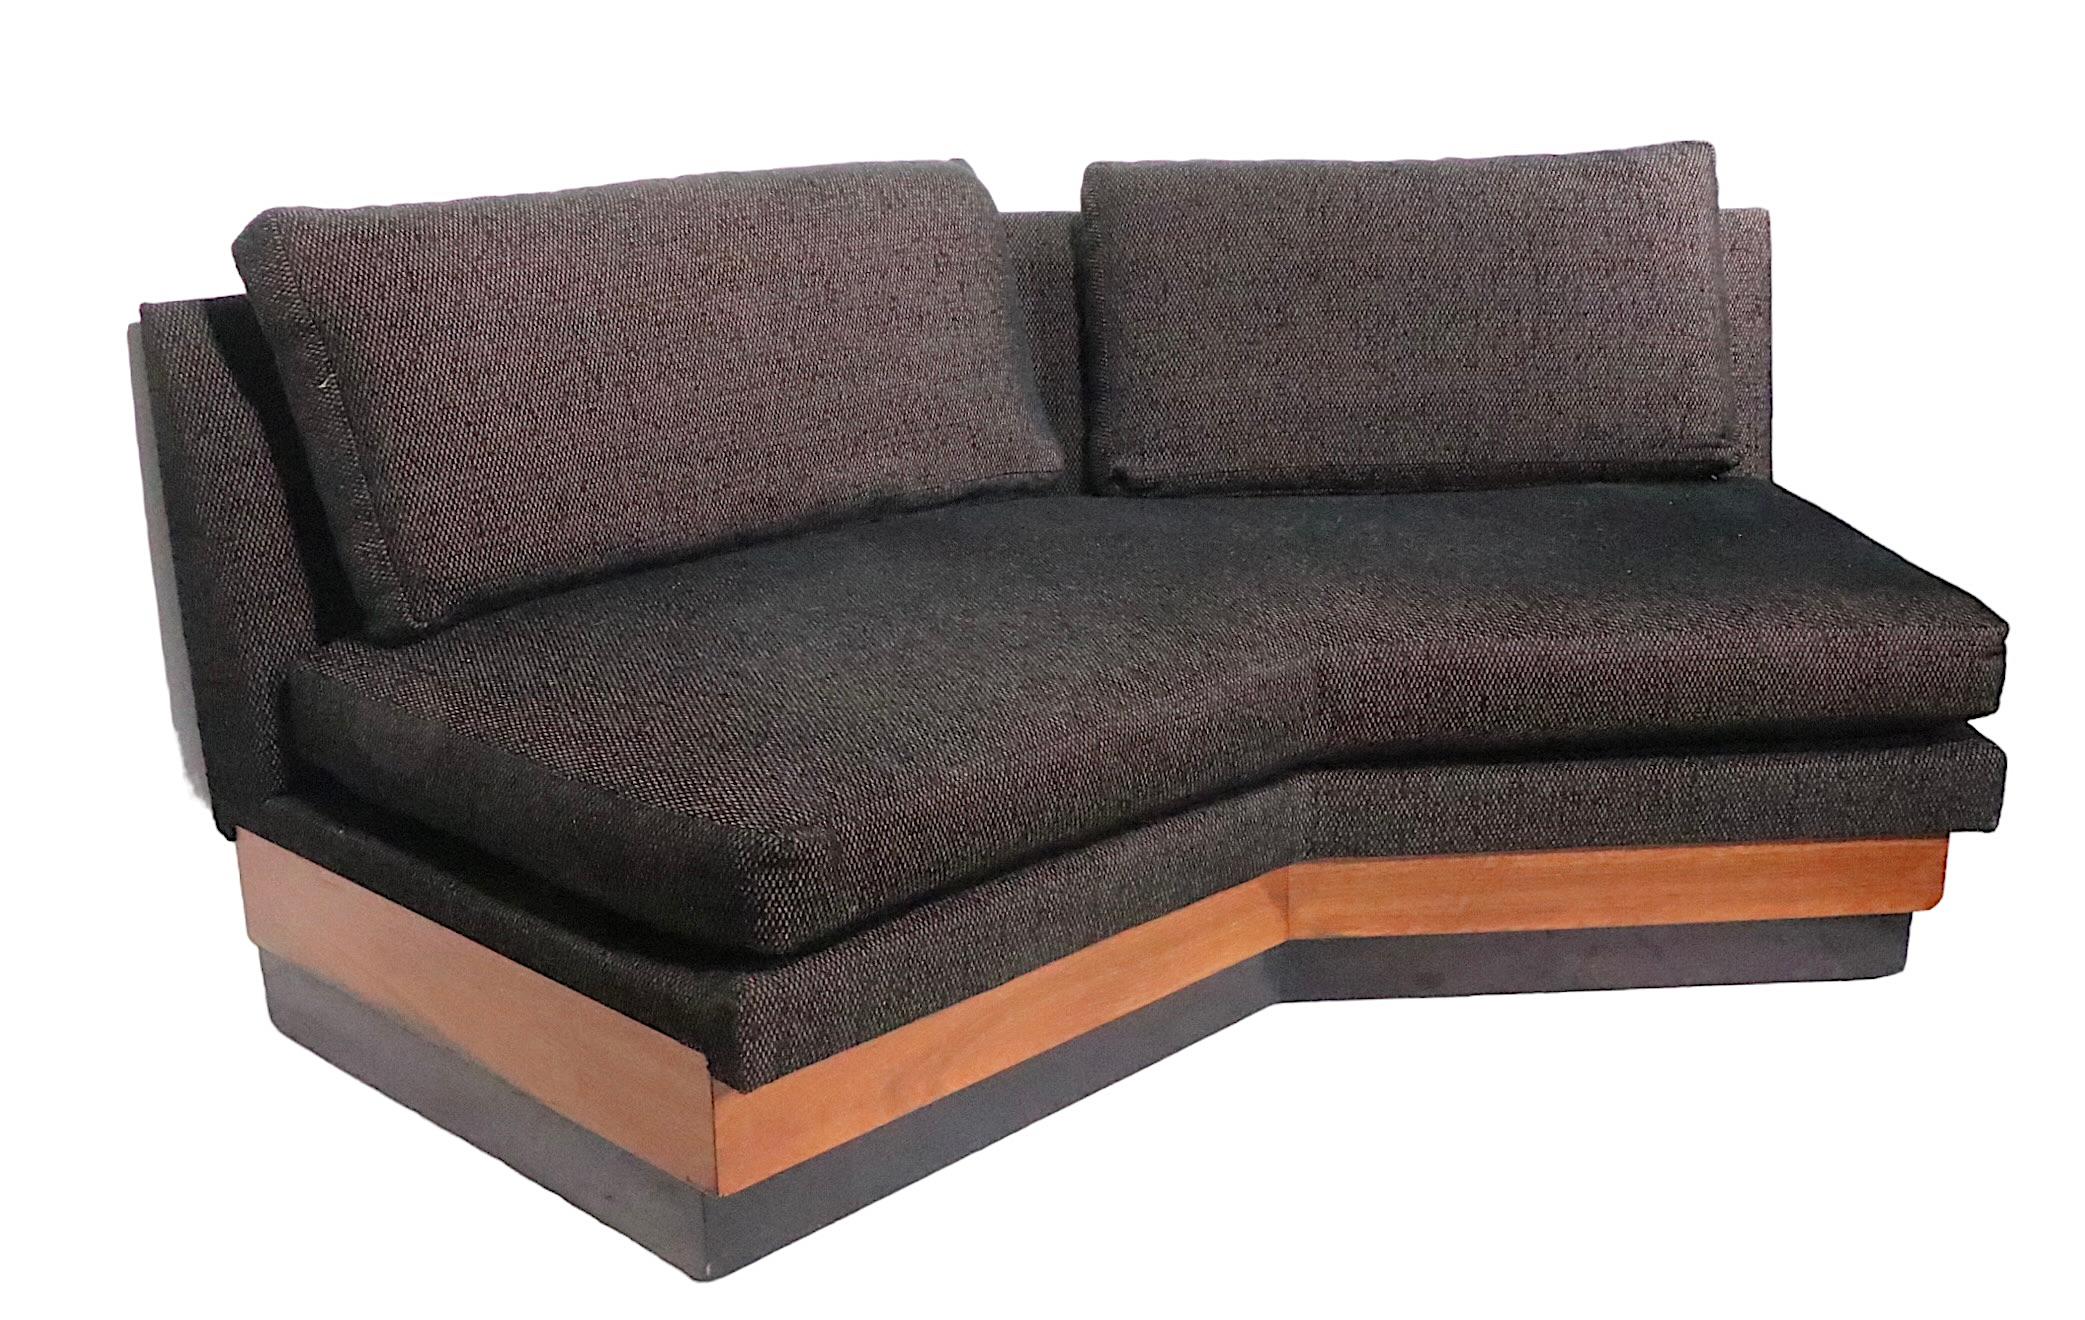 Mid Century Sectional Sofa by Adrian Pearsall for Craft Associates c 1960's For Sale 5